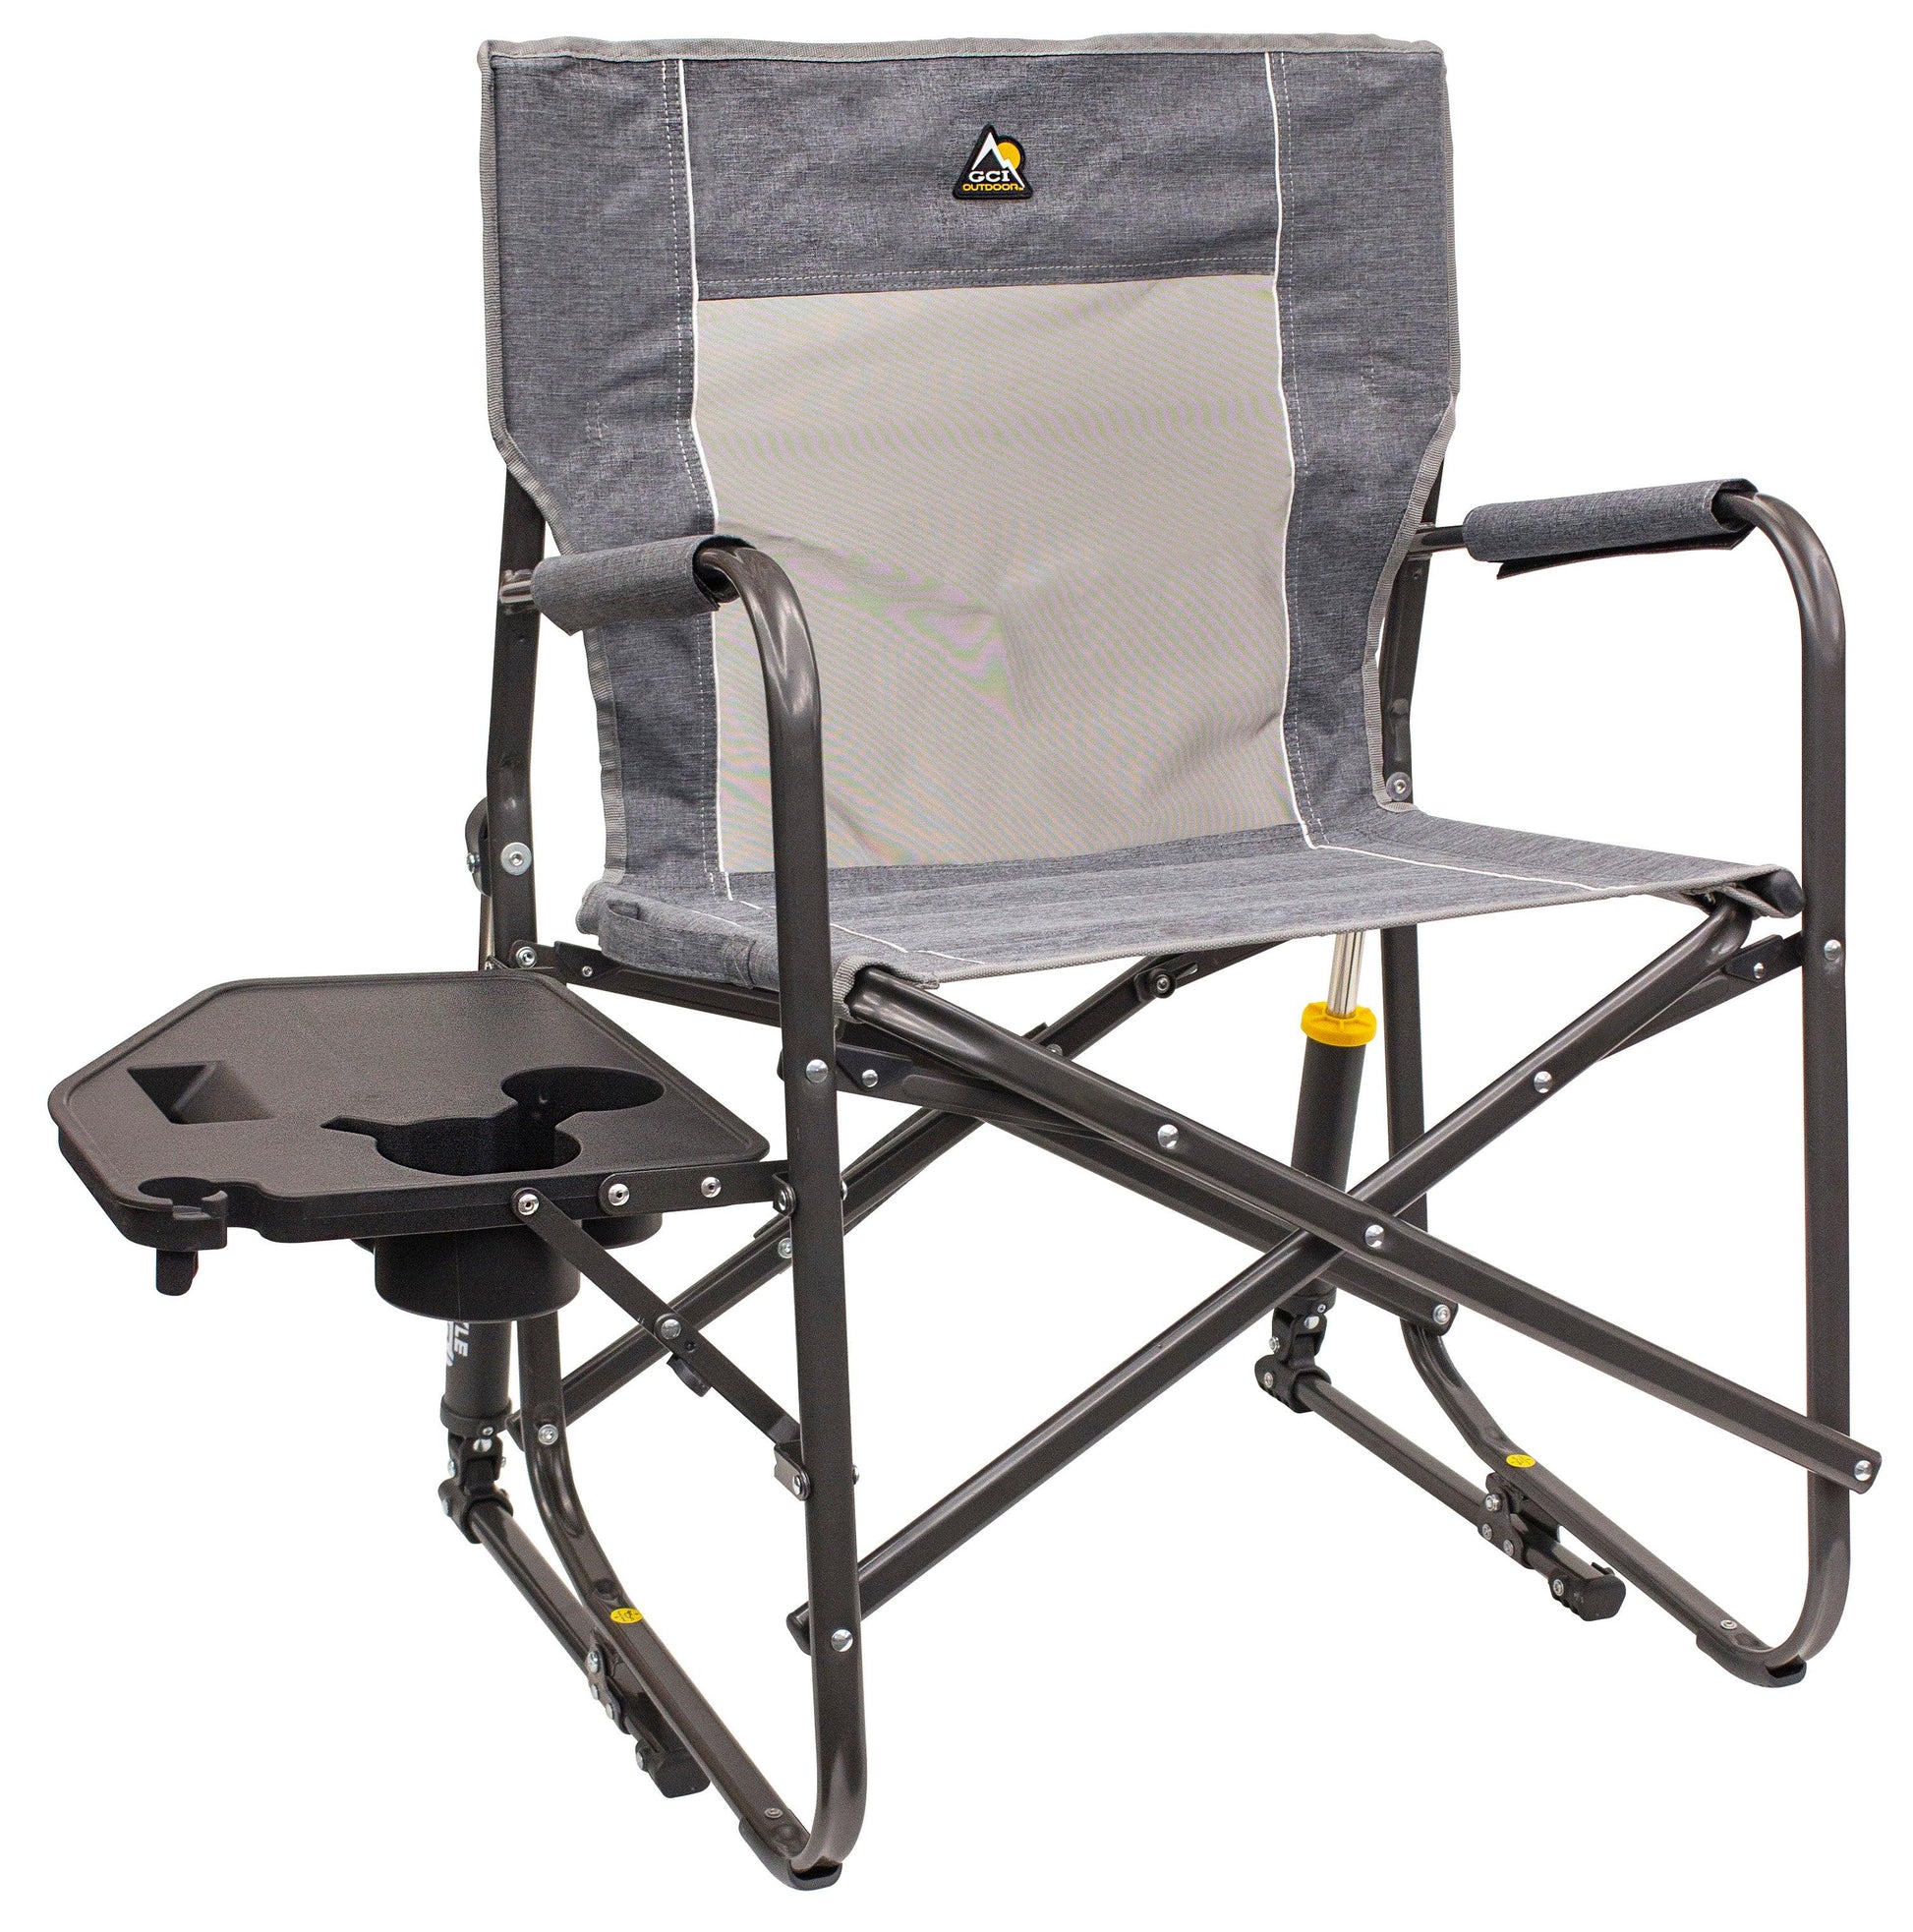 Outdoor Freestyle Rocker Portable Rocking Chair and Outdoor Camping Chair